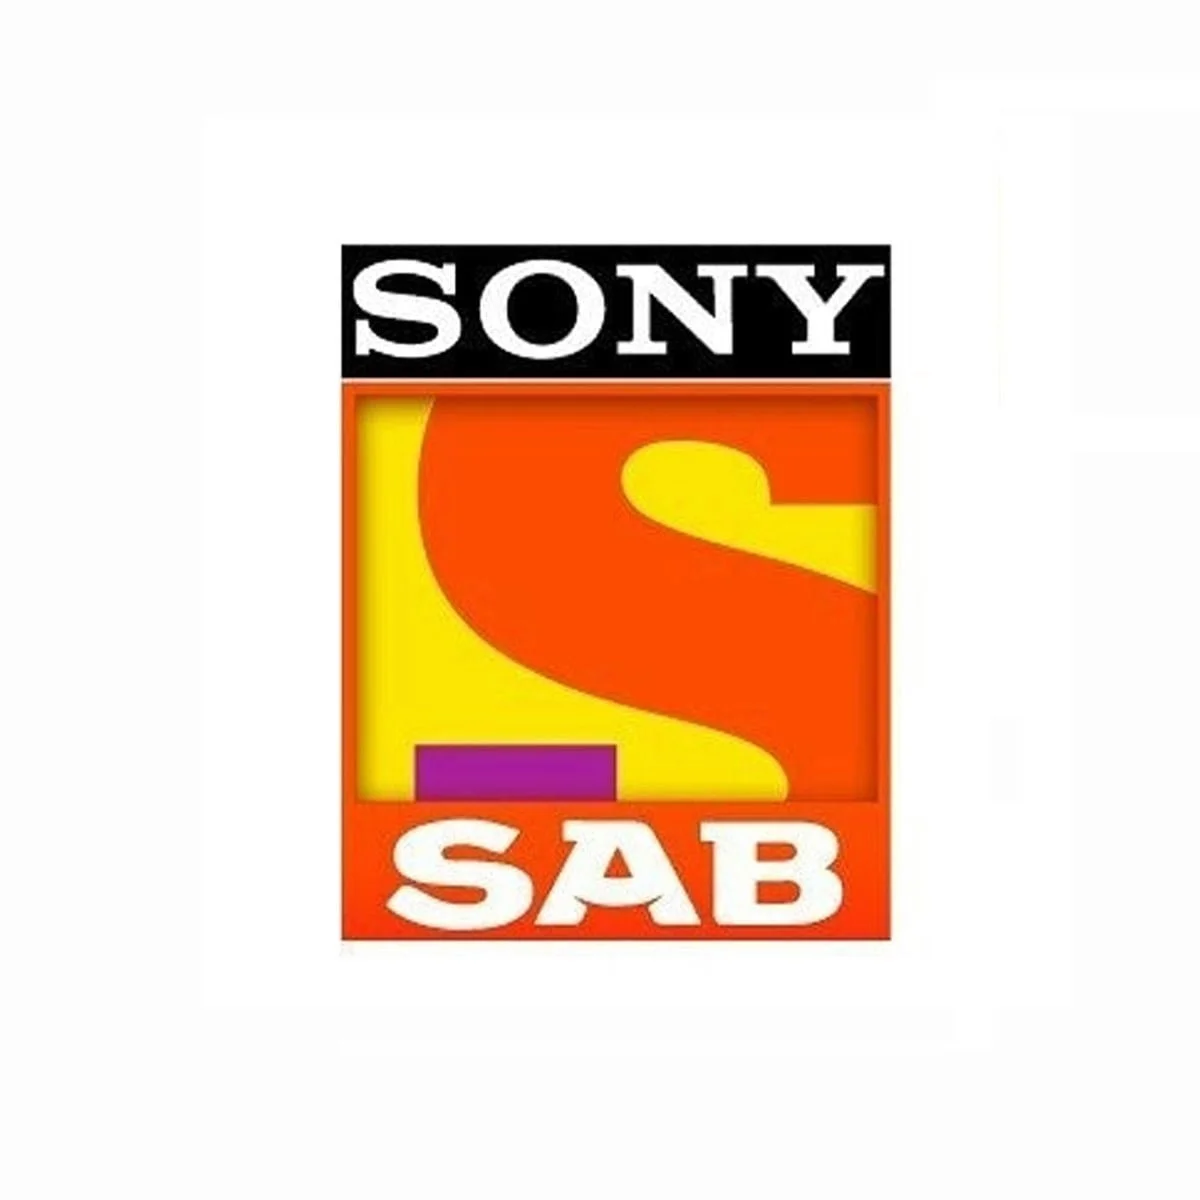 Sony SAB launches 'New Year Idea' contest